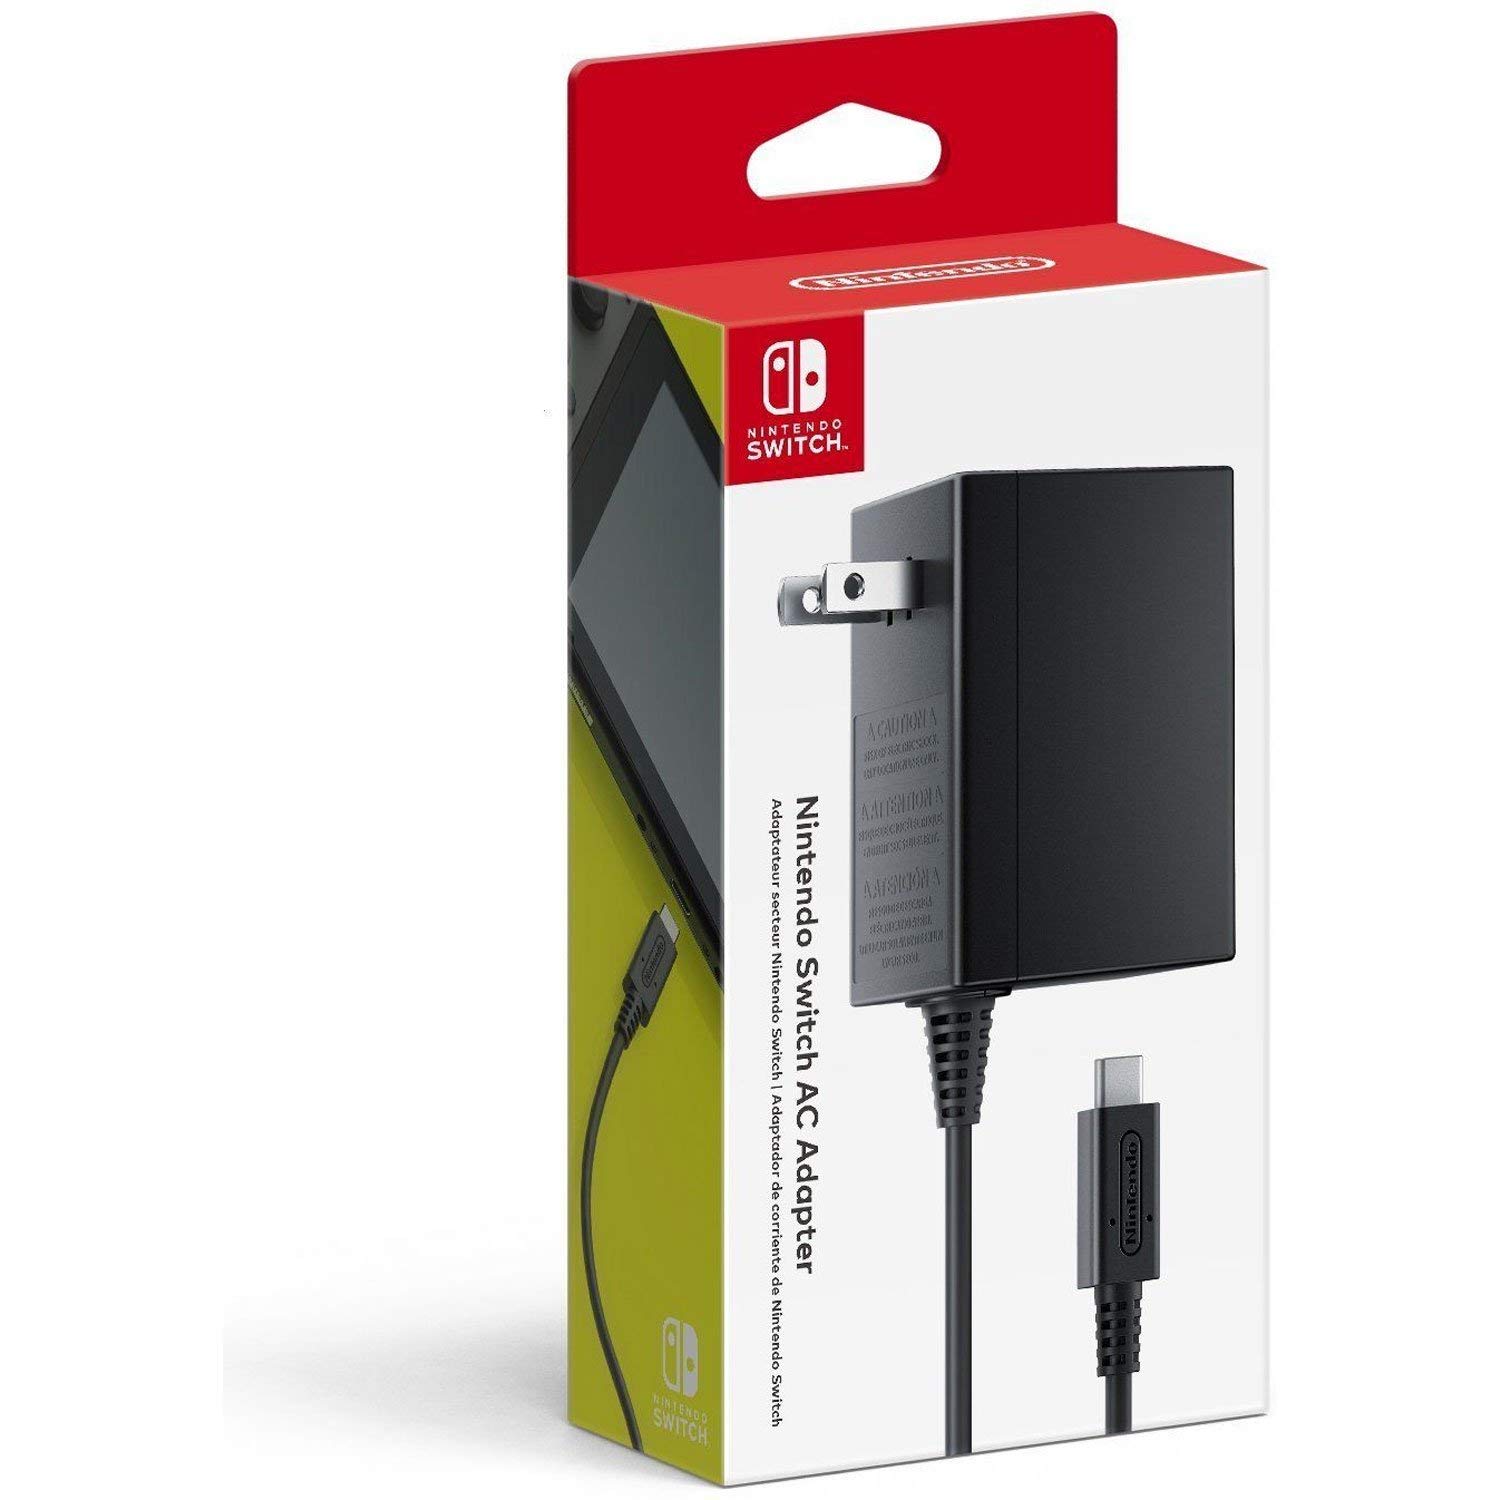 Check the charging cable and power adapter for any visible damage or fraying.
Ensure that the charging cable is securely connected to both the Nintendo Switch and the power adapter.